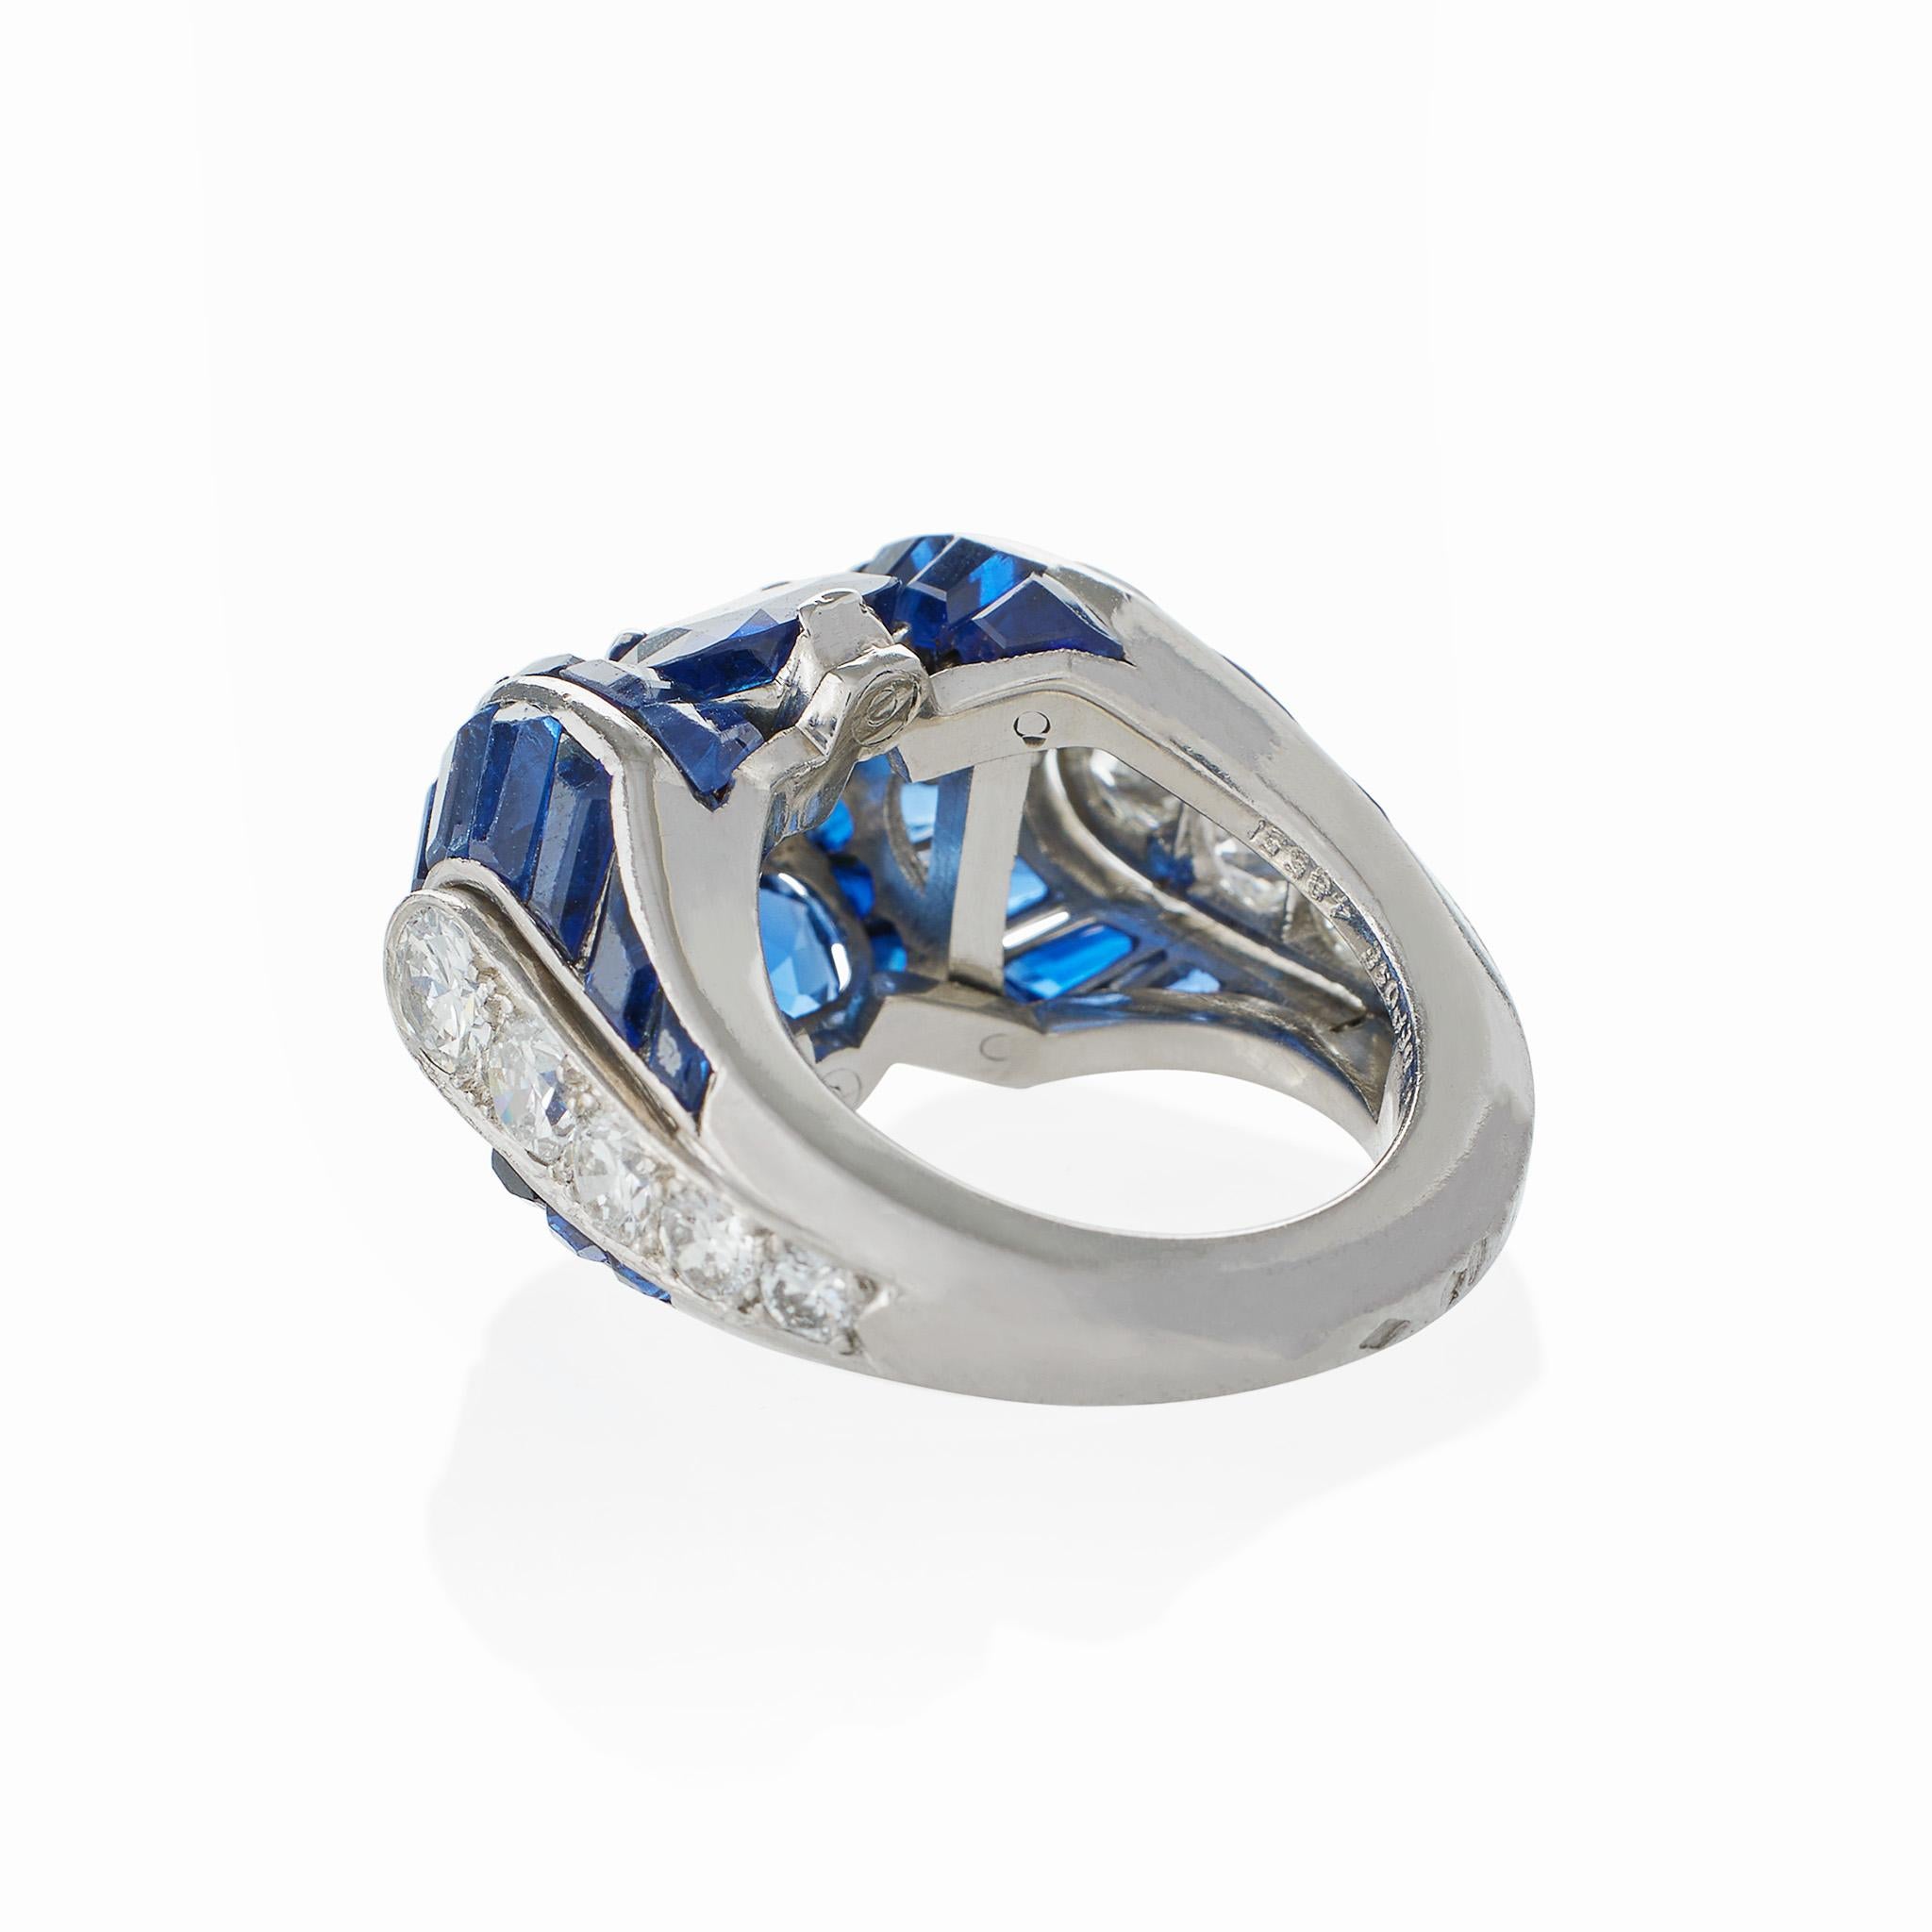 Van Cleef & Arpels Paris No-Heat Burma Sapphire Ring In Excellent Condition For Sale In New York, NY